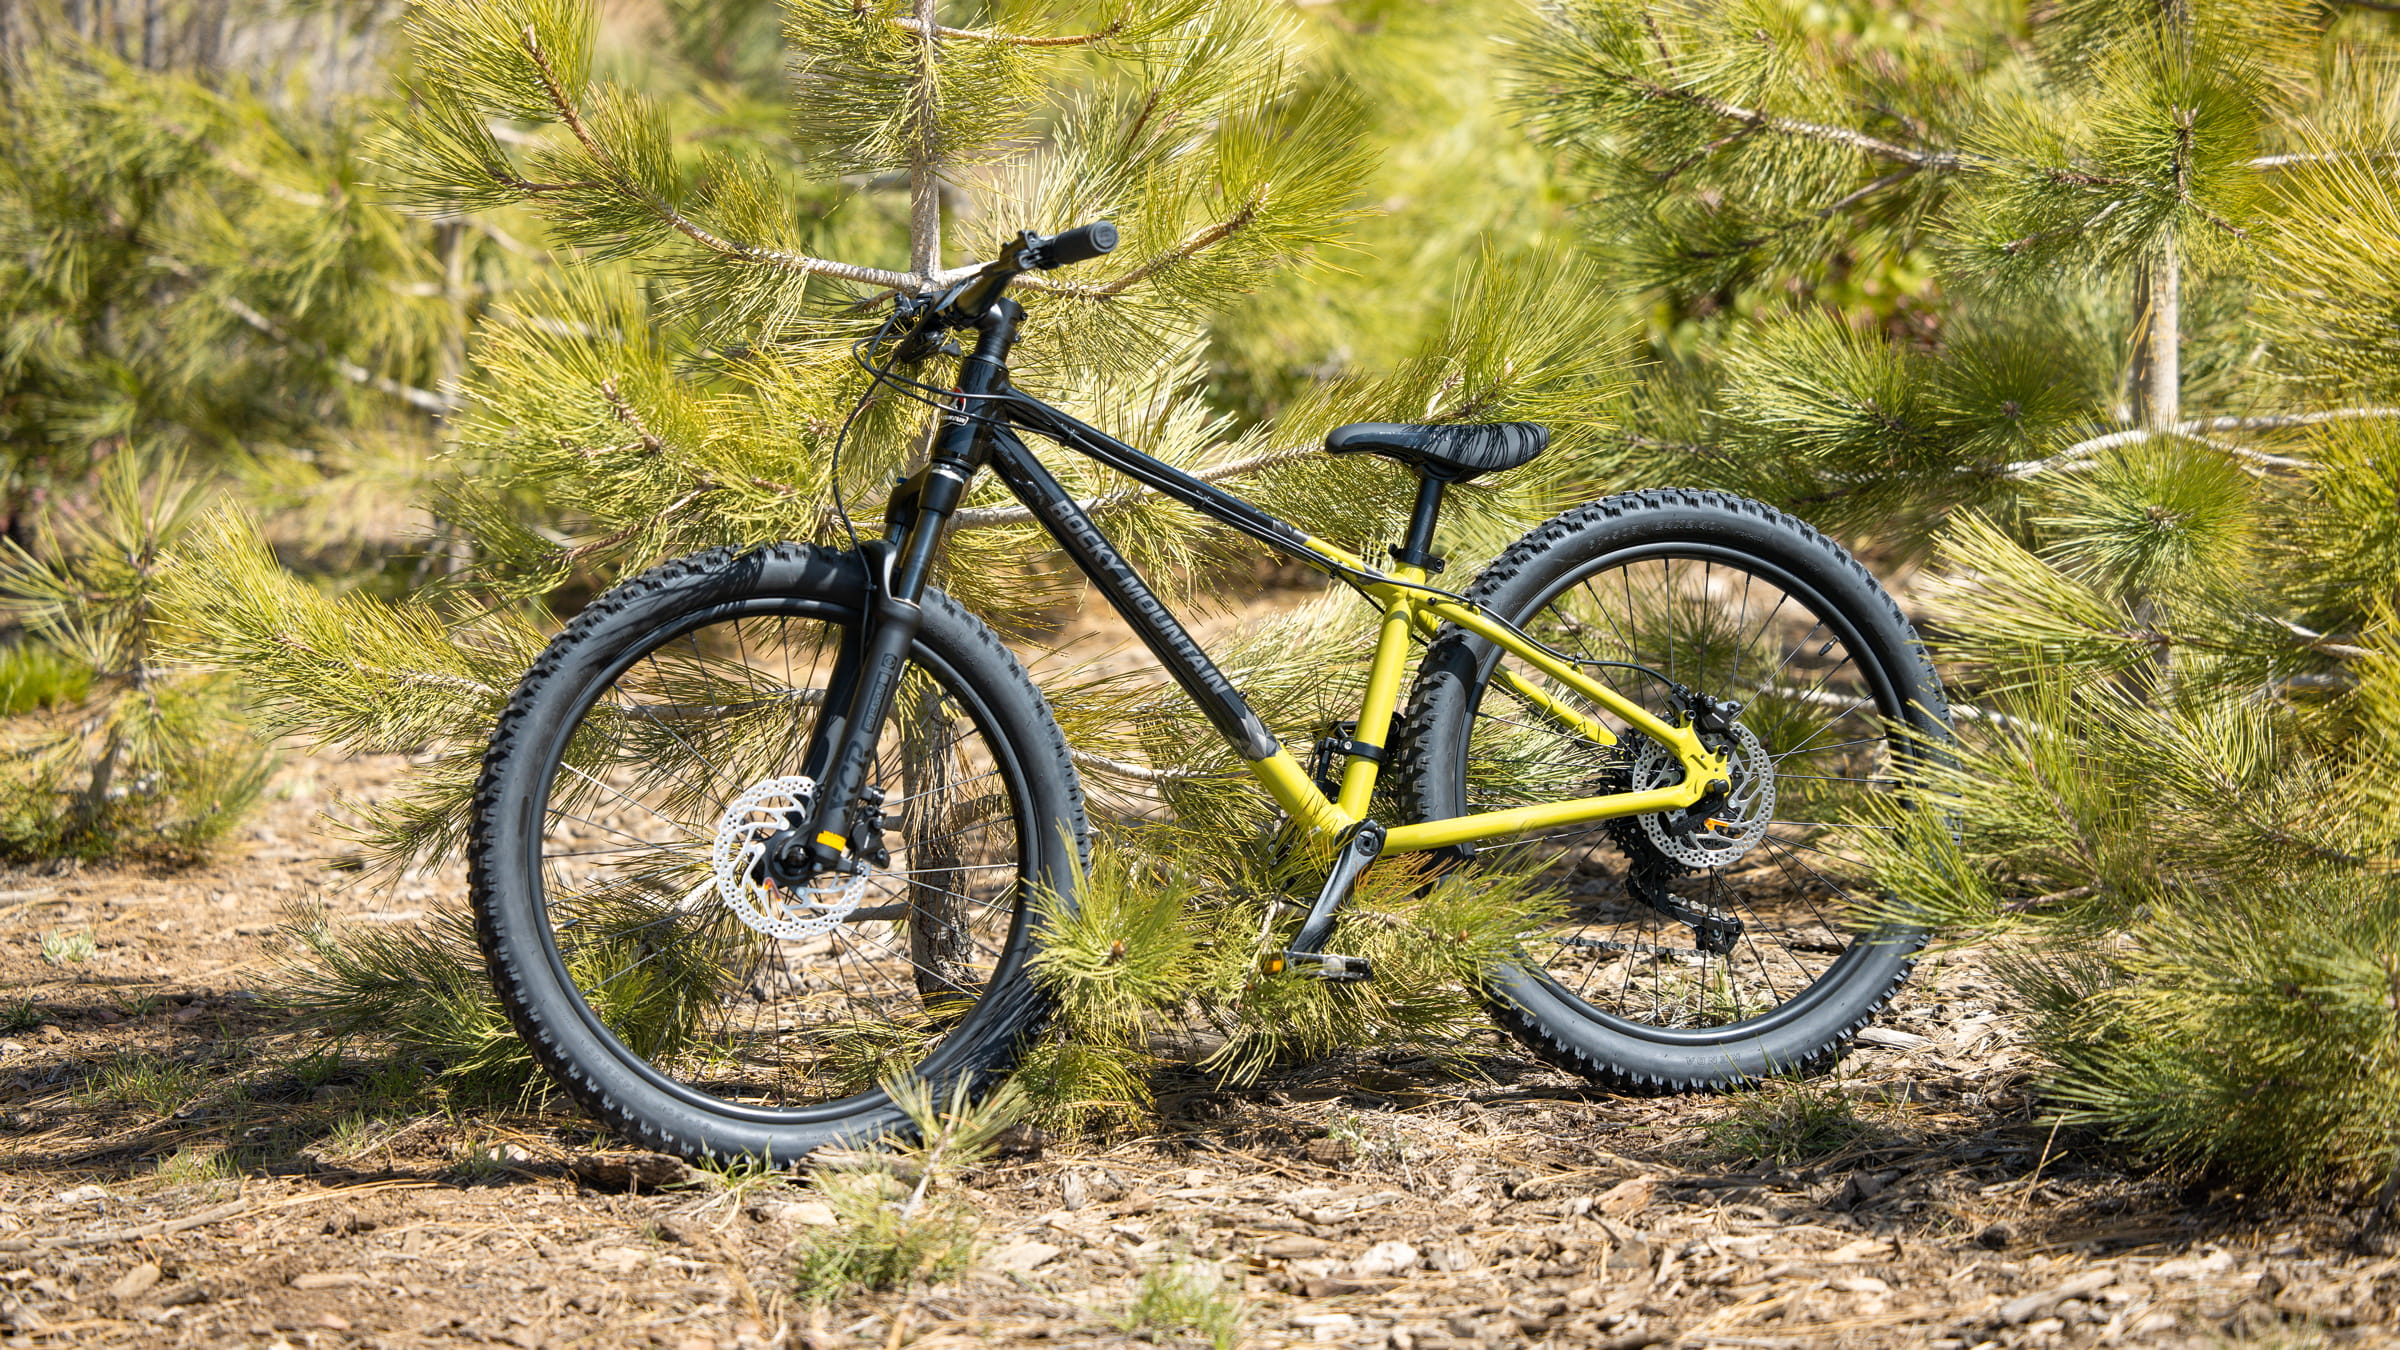 Black with yellow frame mountain bike with black wheels posted up in the wilderness